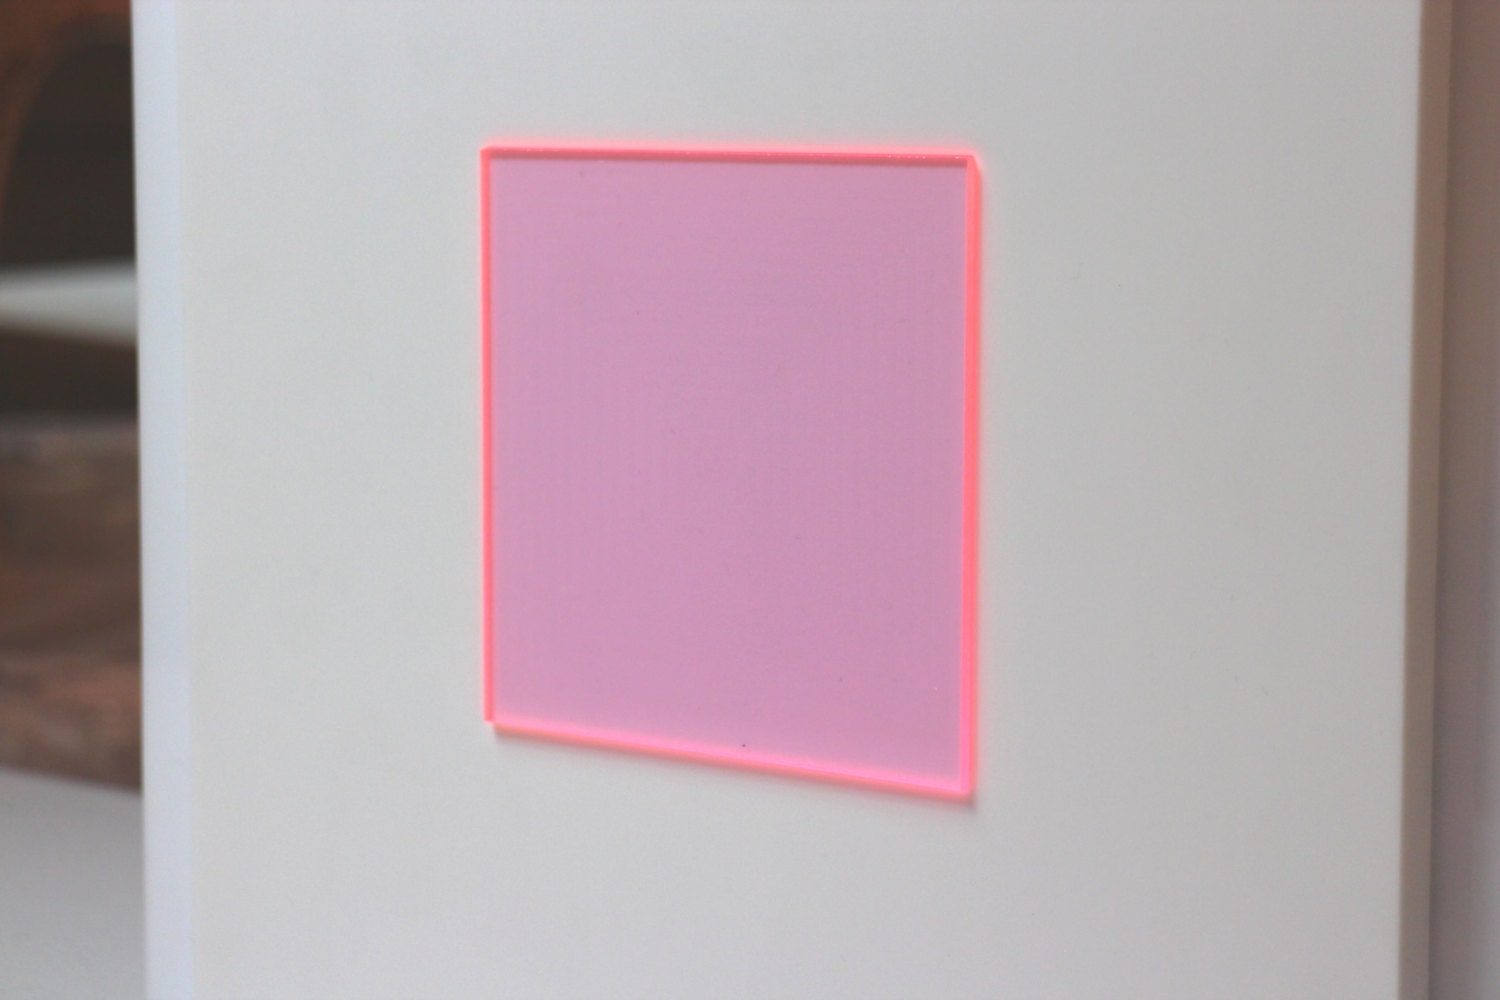 92320 Pink Fluorescent Perspex Sheet costumized sheets and panels